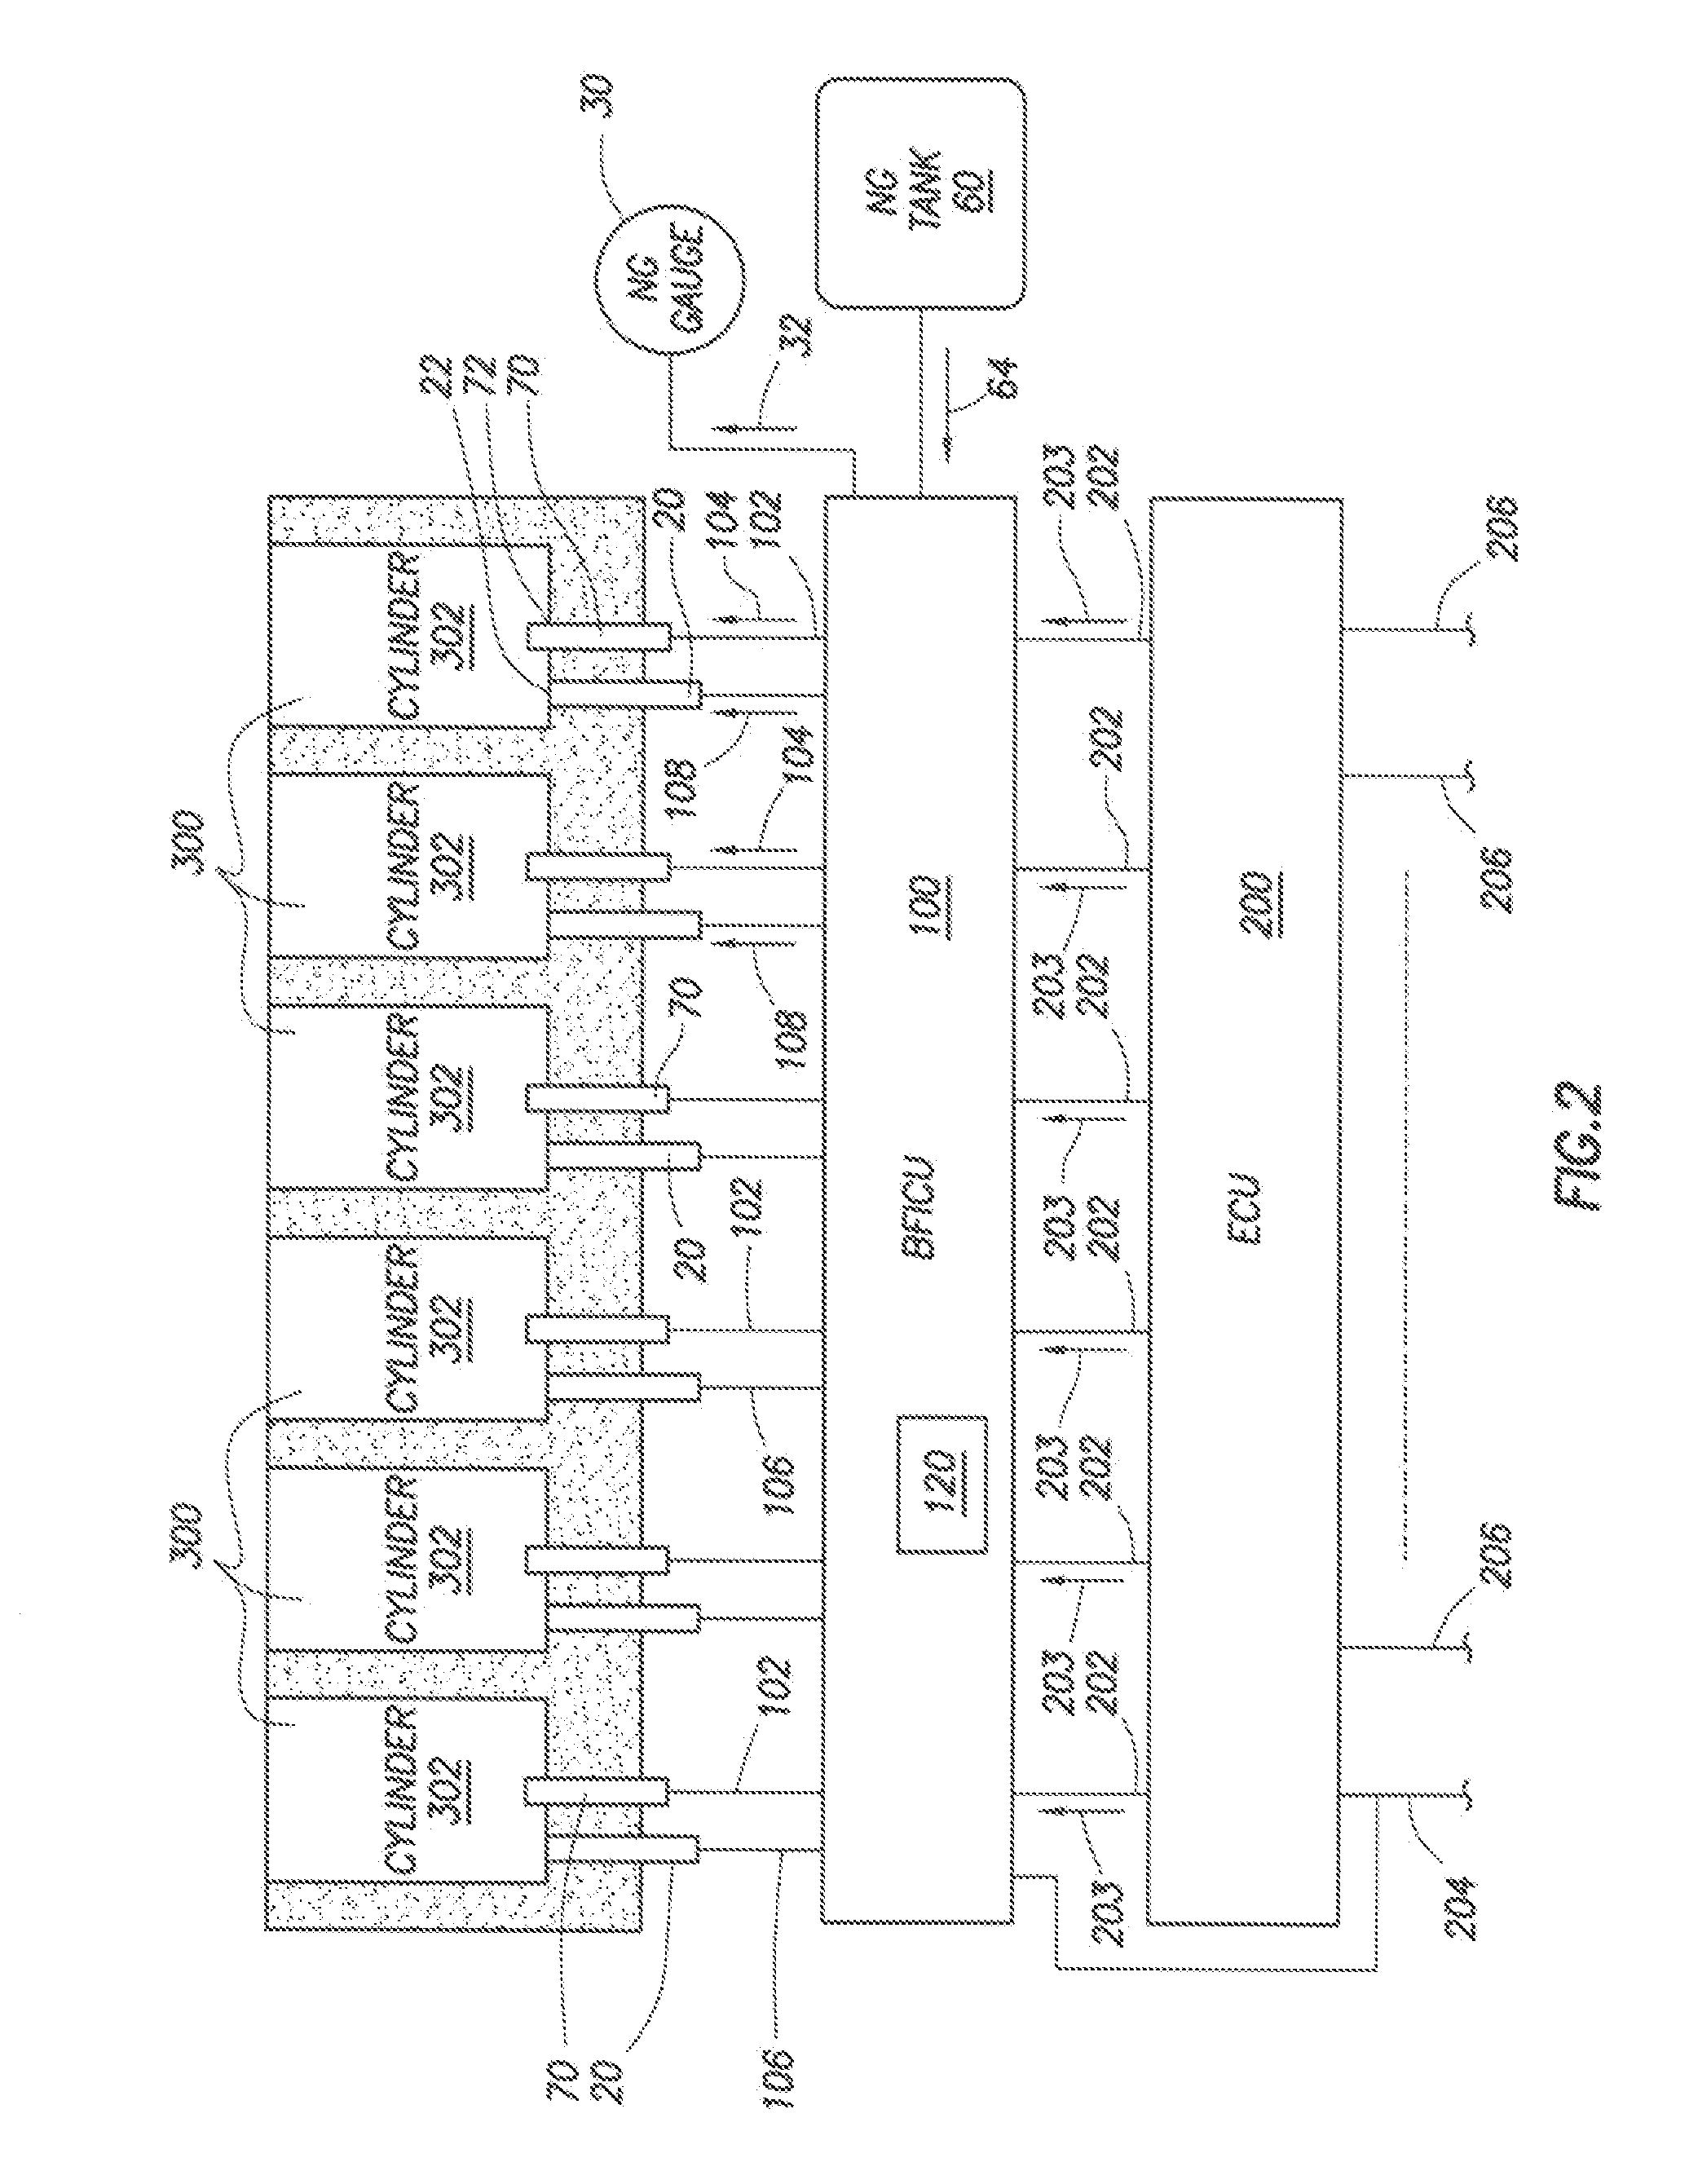 Method and apparatus for converting diesel engines to blended gaseous and diesel fuel engines